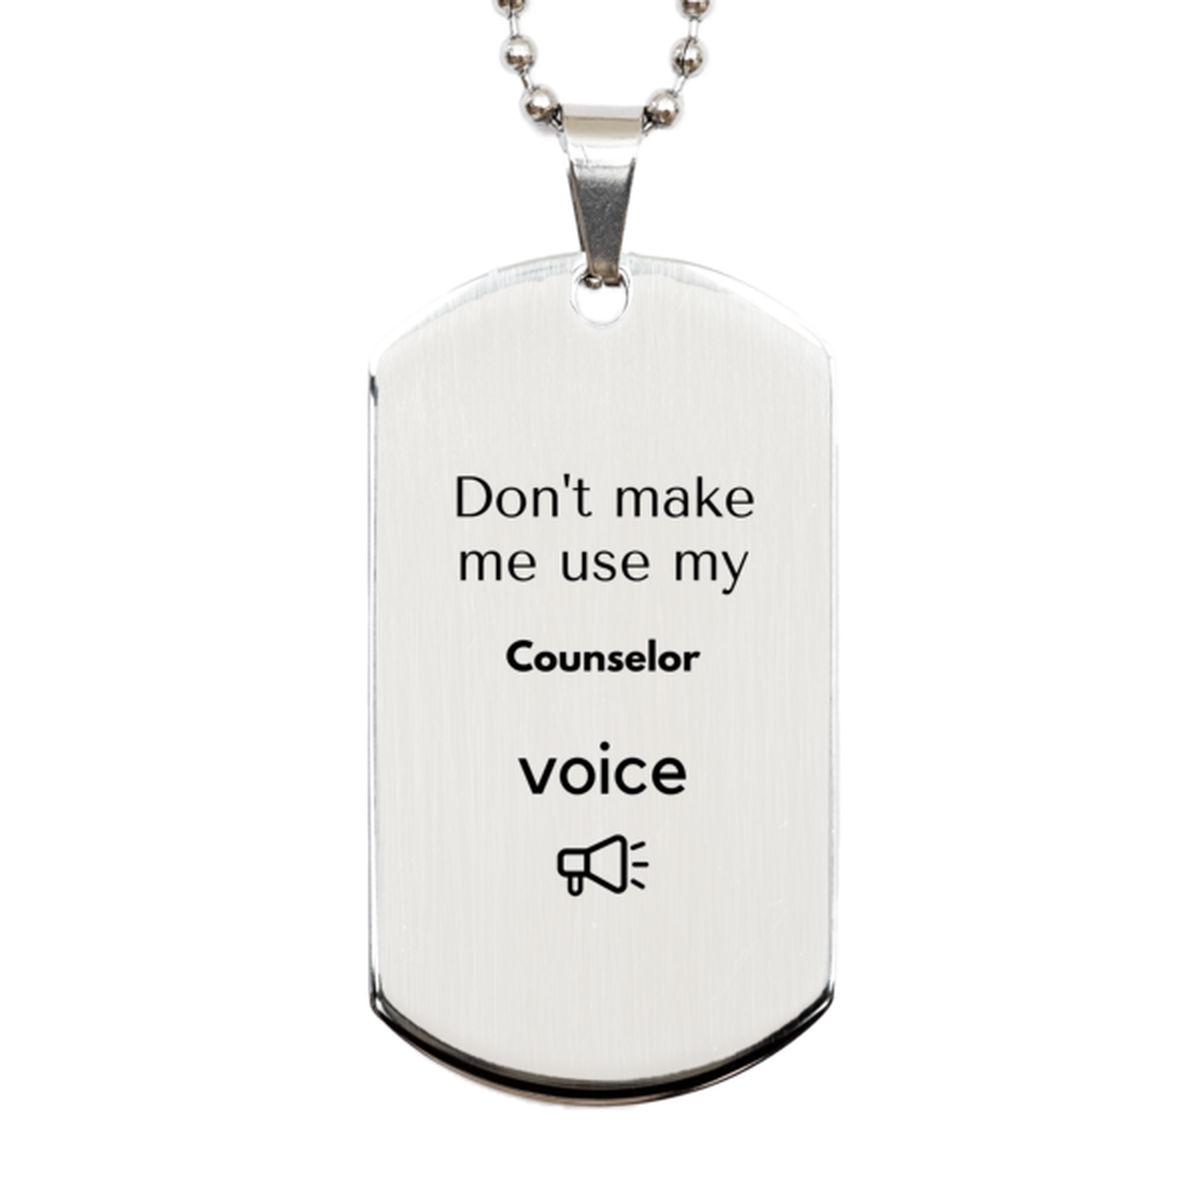 Don't make me use my Counselor voice, Sarcasm Counselor Gifts, Christmas Counselor Silver Dog Tag Birthday Unique Gifts For Counselor Coworkers, Men, Women, Colleague, Friends